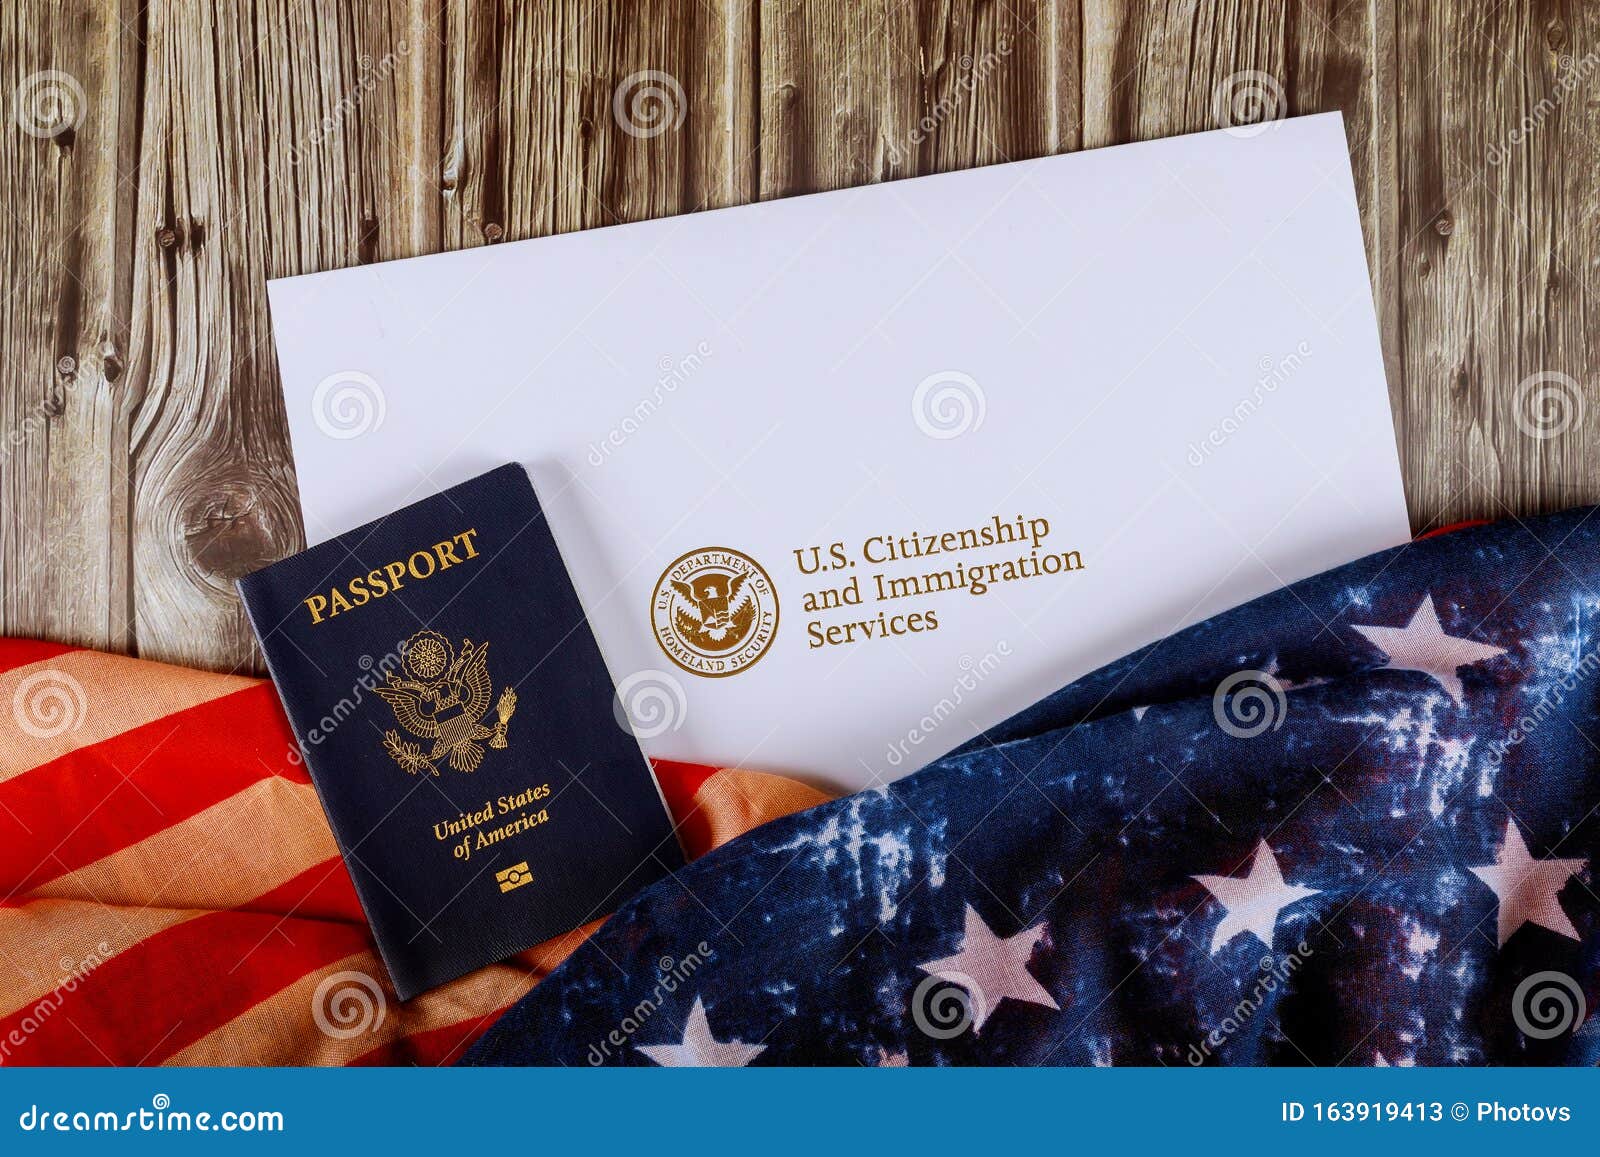 USA Passport and Naturalization Certificate of Citizenship US Flag Over  Wooden Background Stock Image - Image of legislation, american: 163919413